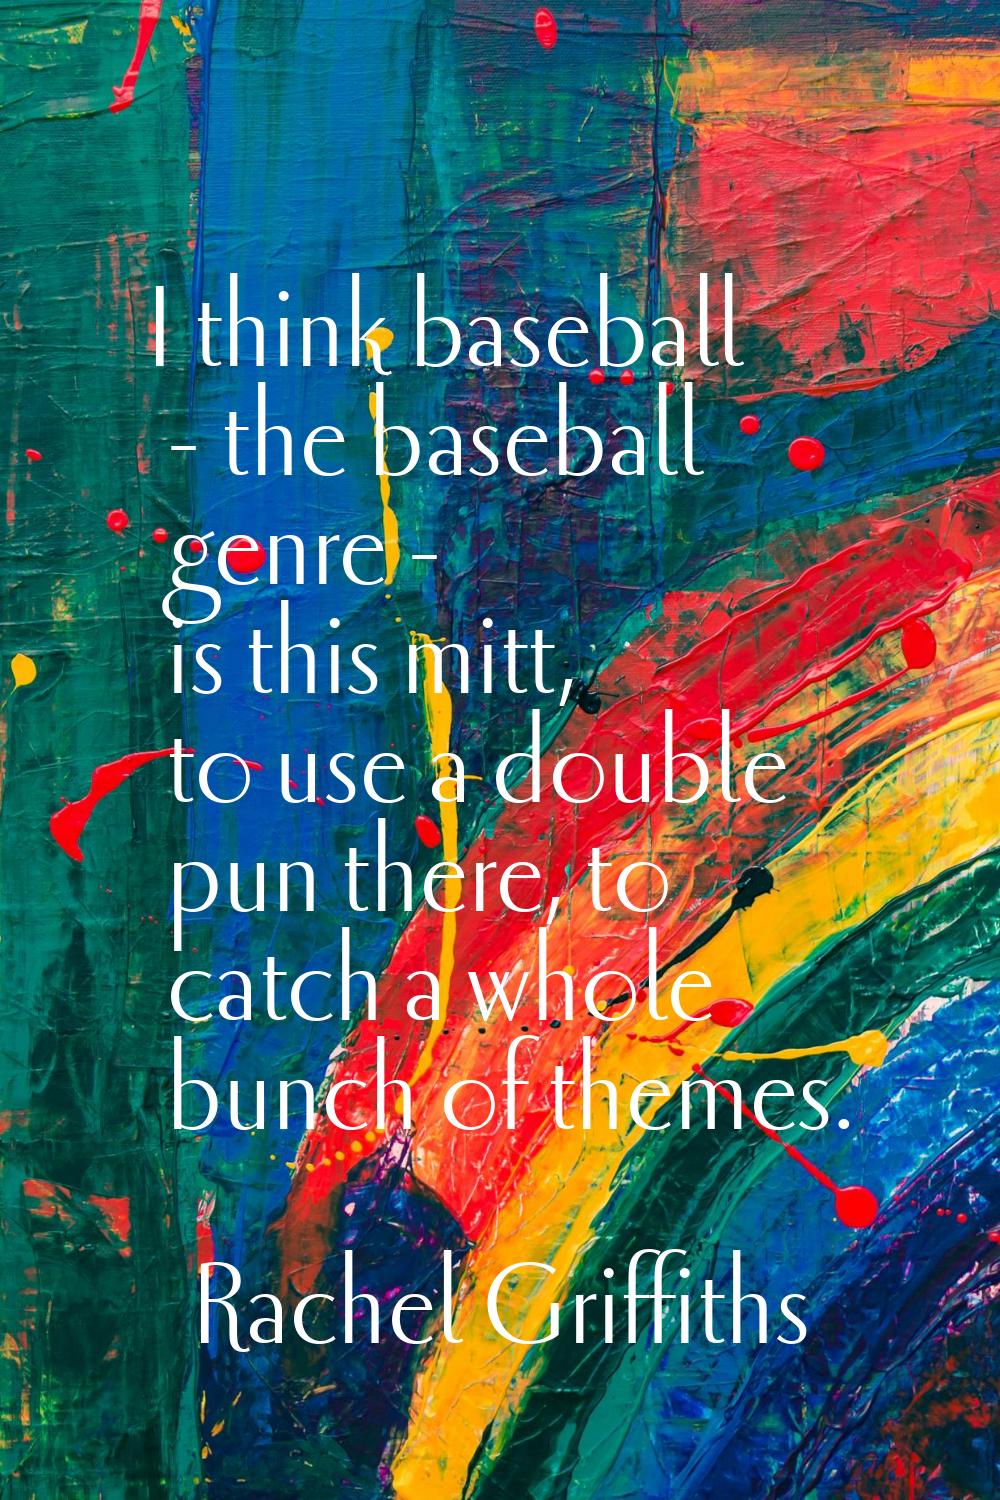 I think baseball - the baseball genre - is this mitt, to use a double pun there, to catch a whole b